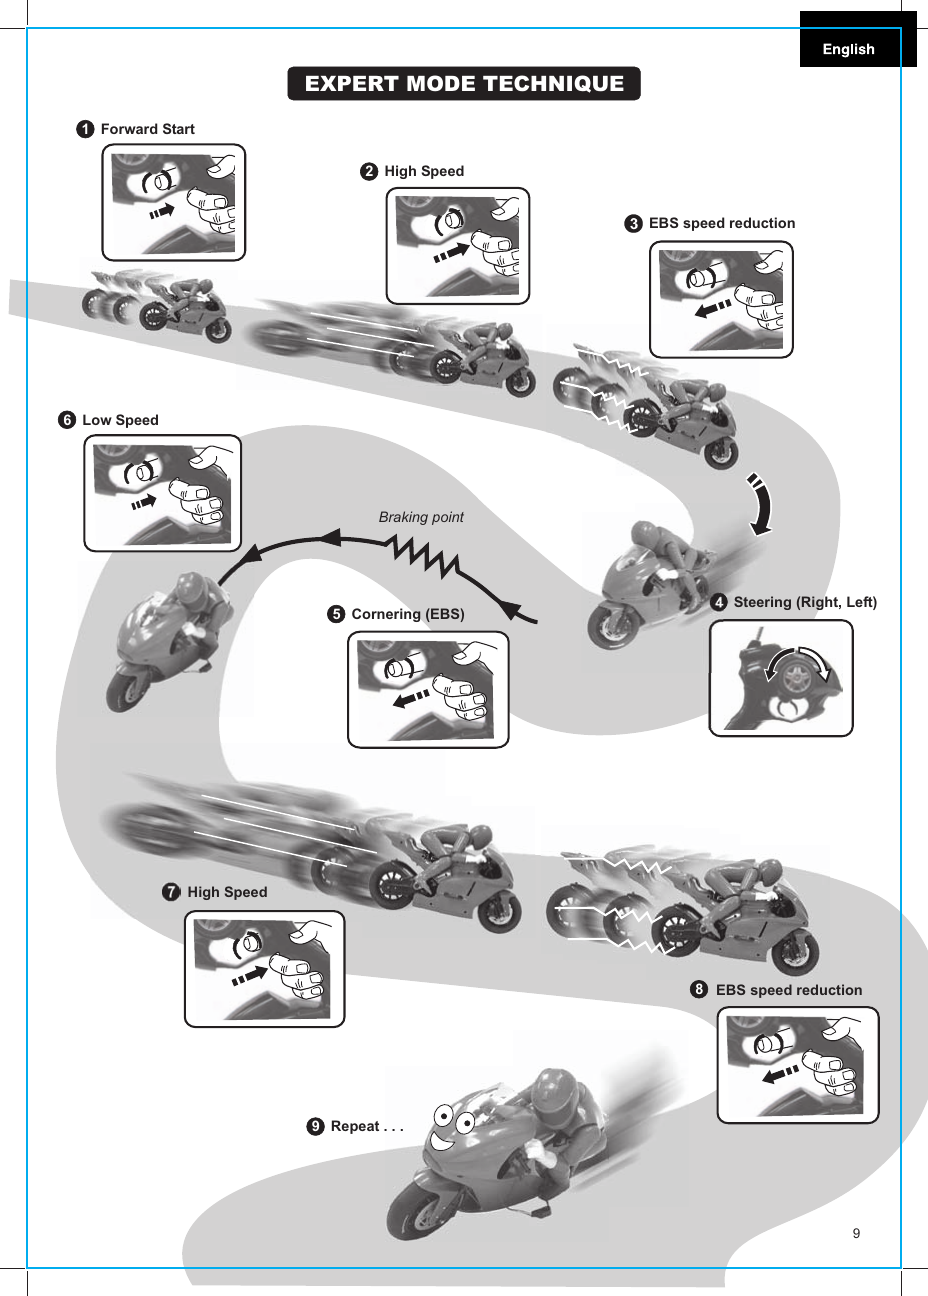 1Forward Start4Steering (Right, Left)5Cornering (EBS)6Low Speed8High Speed9Repeat . . .EXPERT MODE TECHNIQUEBraking pointEBS speed reductionEBS speed reduction2High Speed9